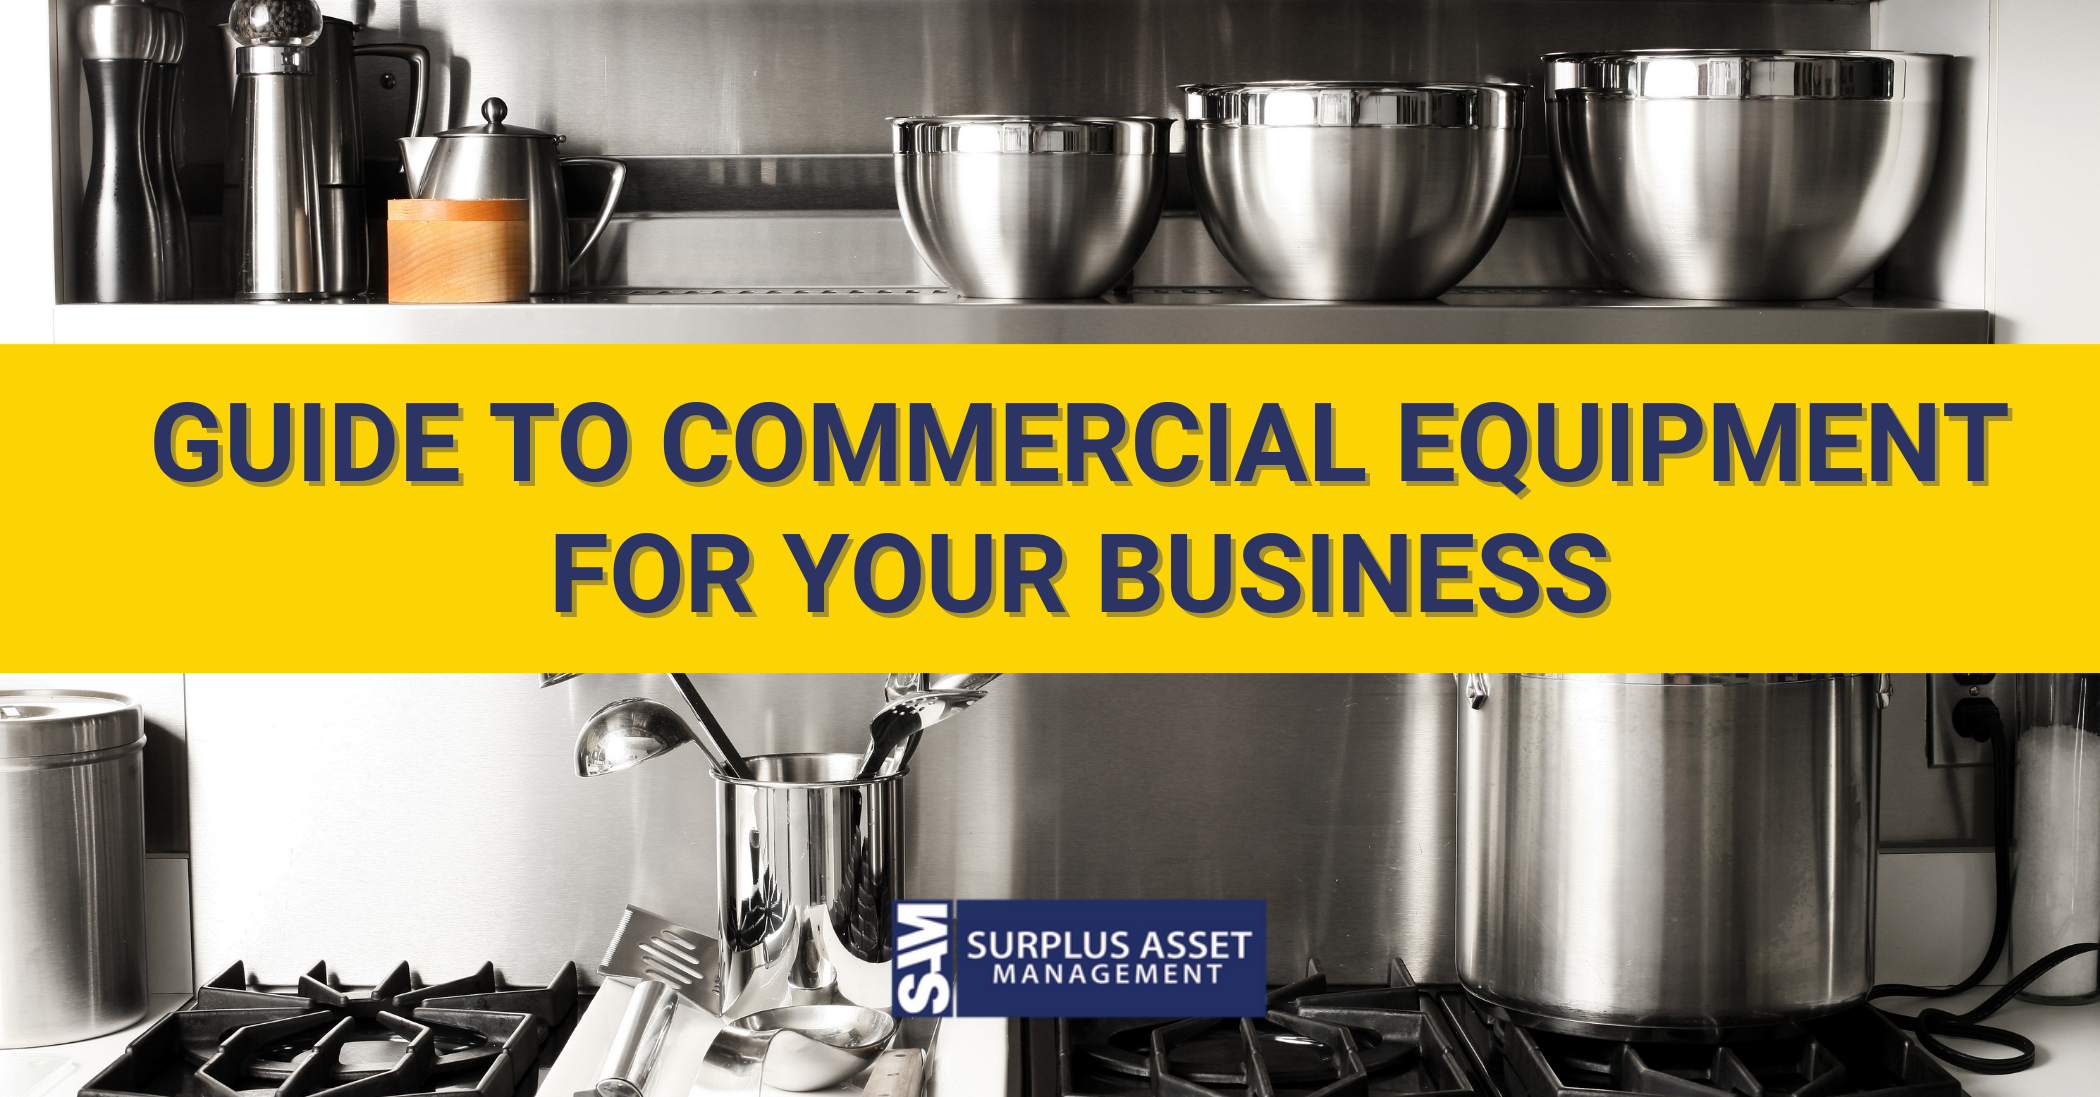 Guide to Commercial Equipment for Your Business